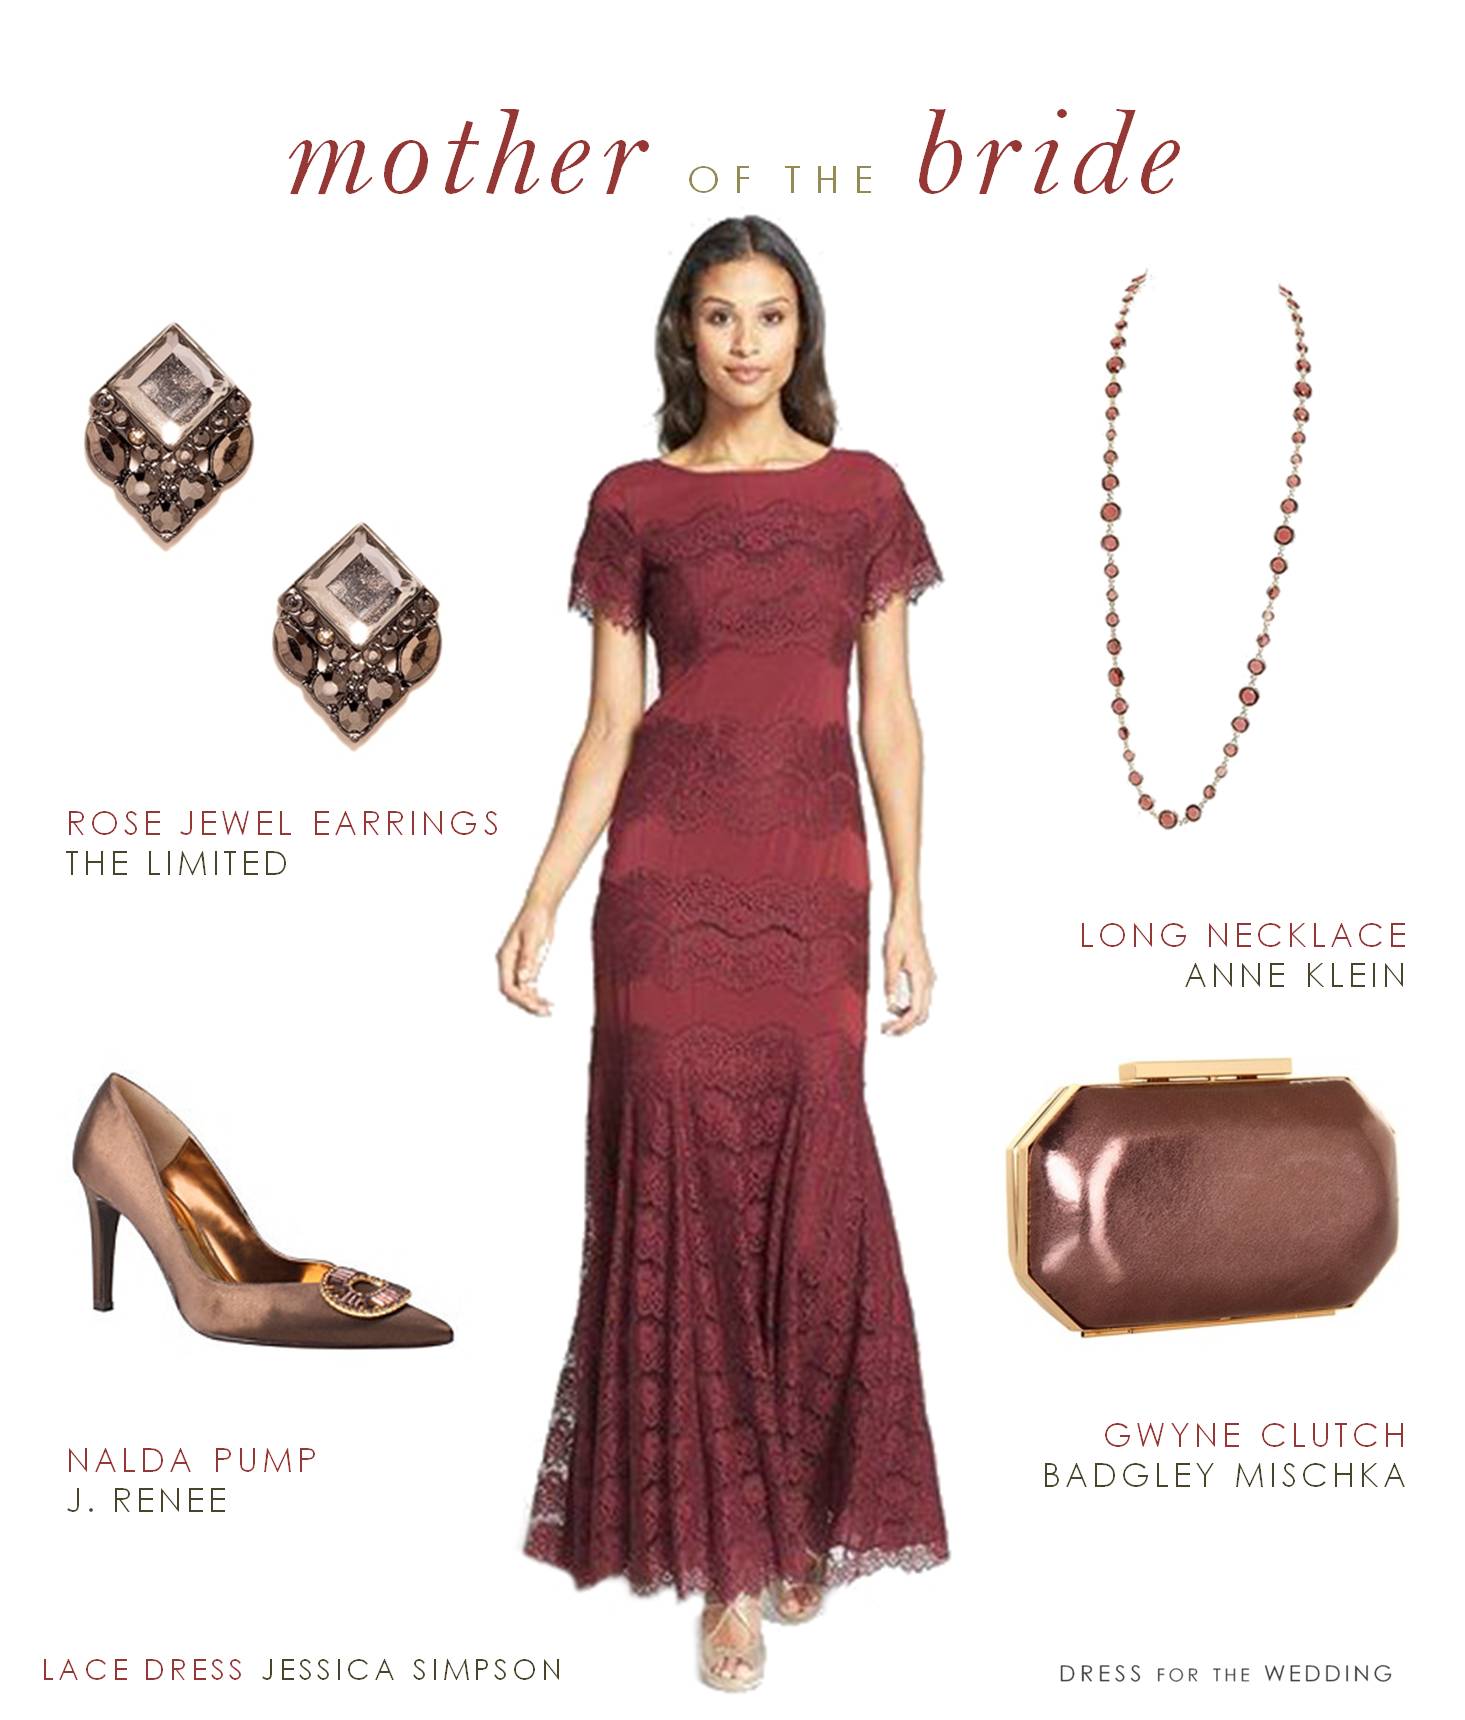 How to Accessorize a Burgundy Dress: What Color Shoes to Wear? - The Jacket  Maker Blog